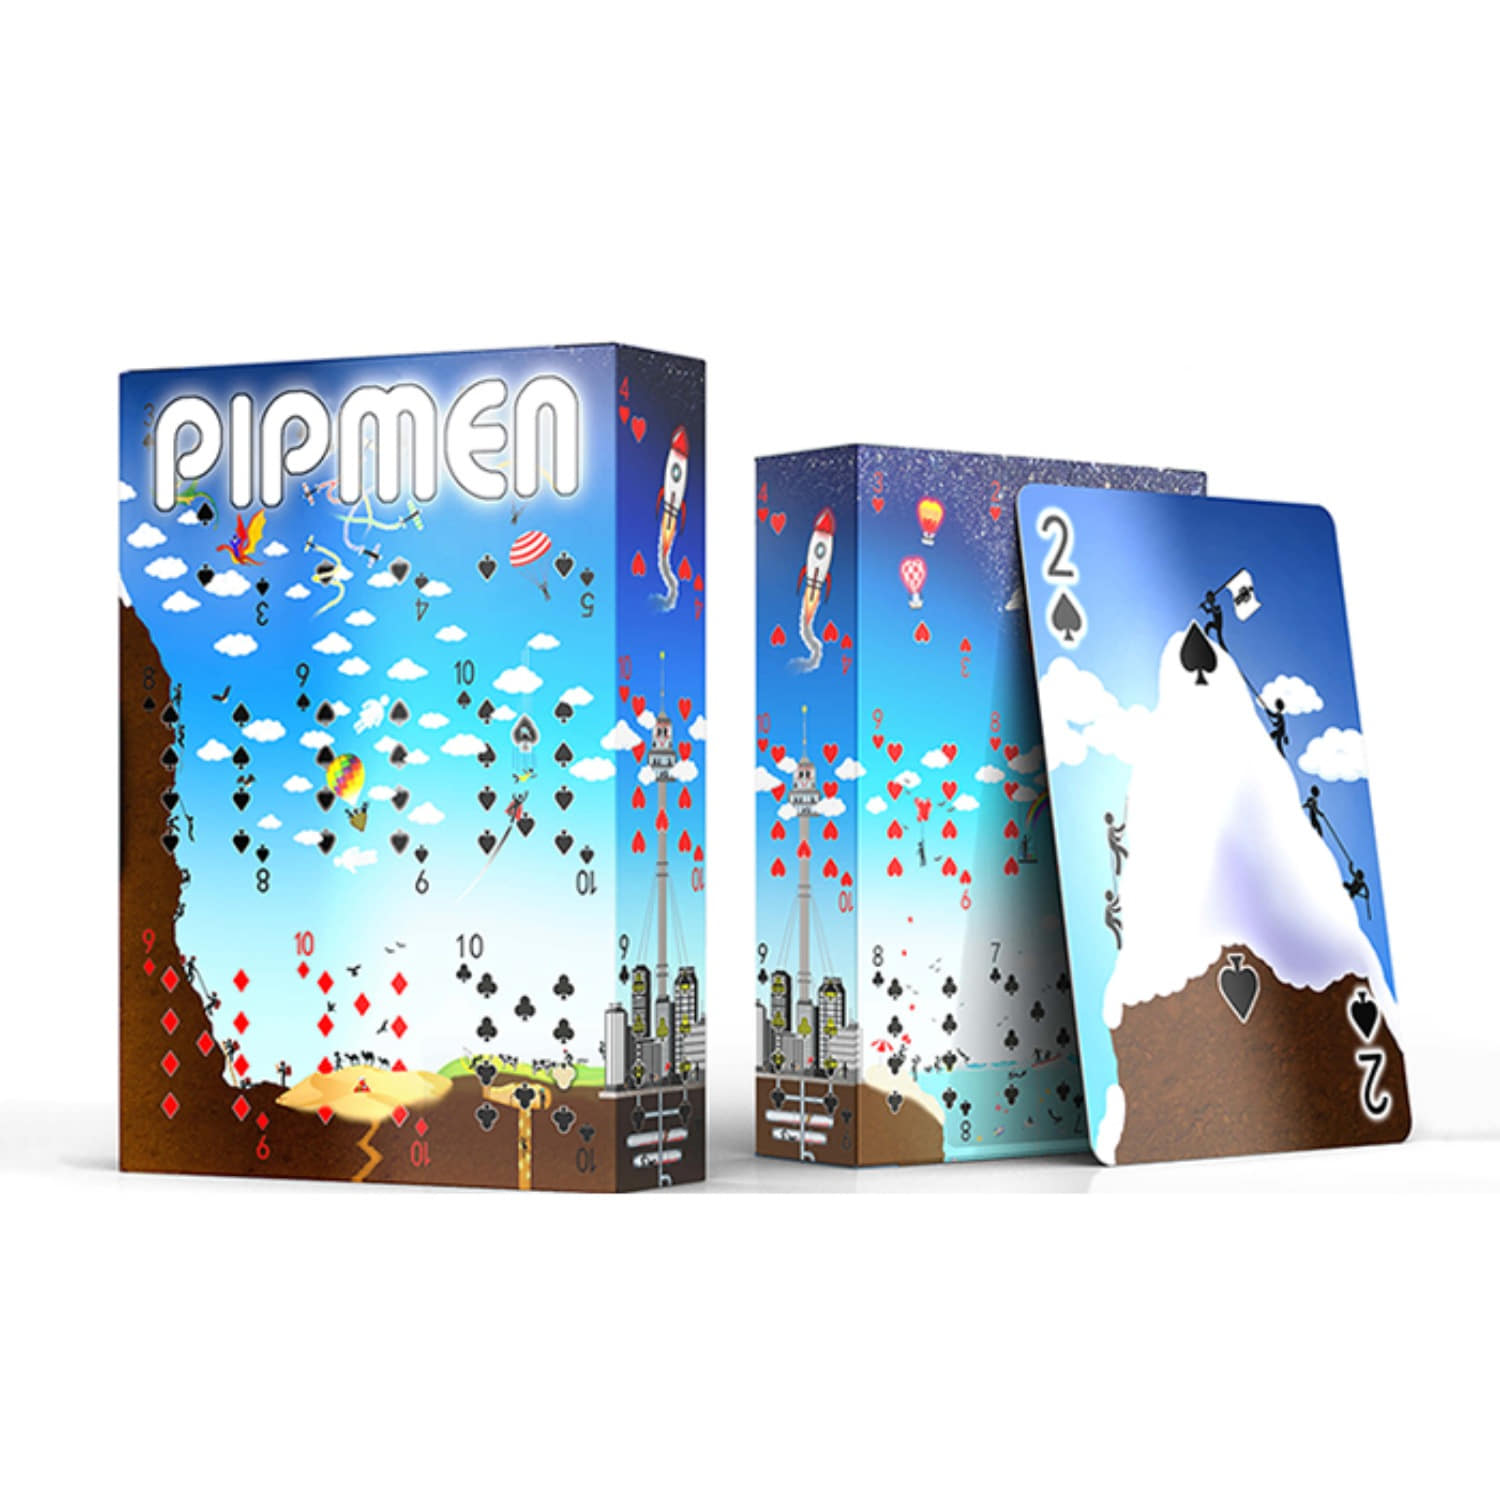 [PIP멘 V2] Pipmen Version 2 World Full Art Playing Cards by Elephant Playing Cards